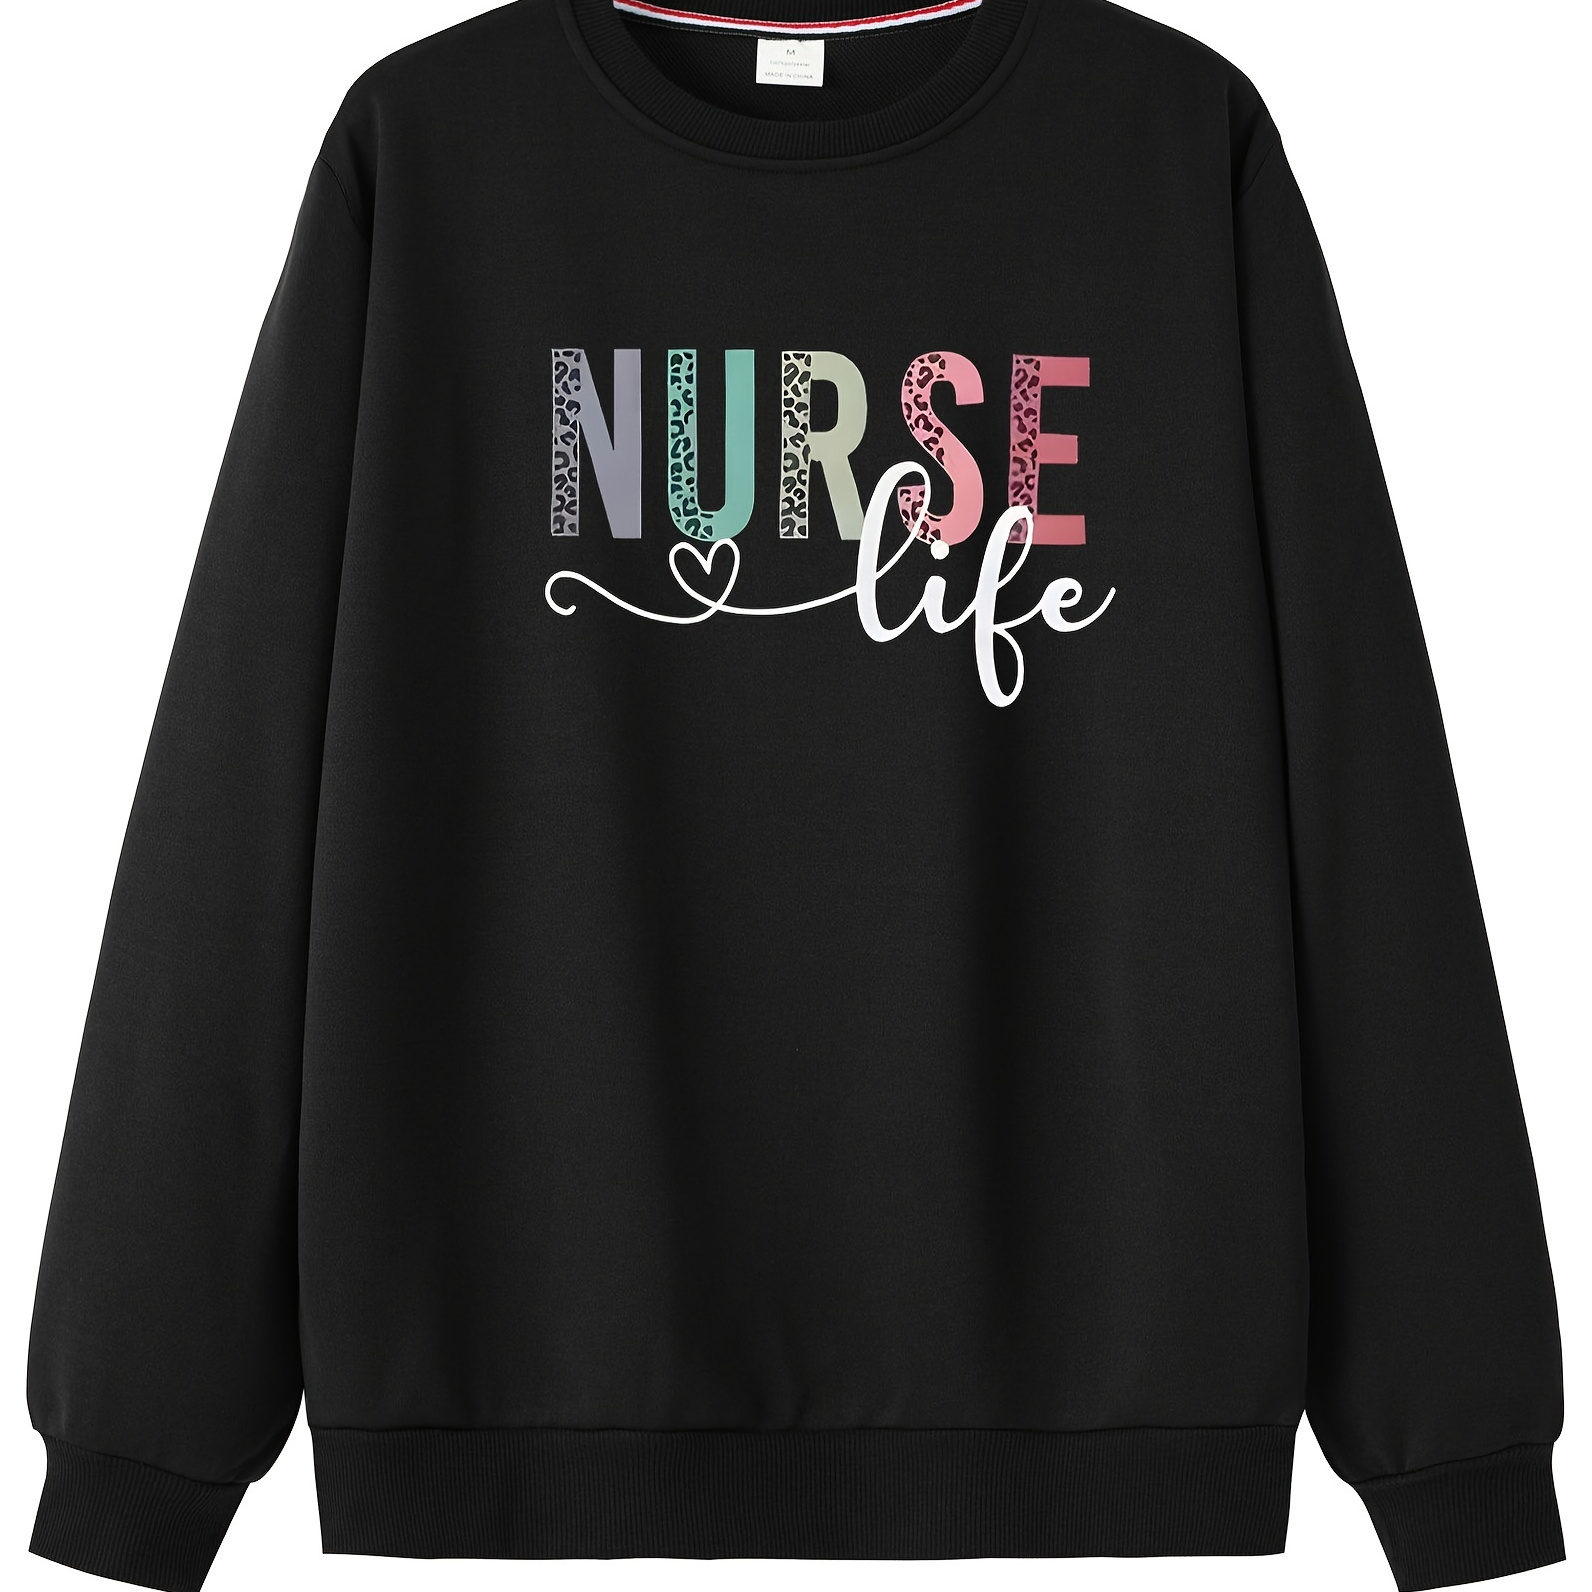 

Nurse Life Print, Sweatshirt With Long Sleeves, Men's Creative Slightly Flex Crew Neck Pullover For Spring Fall And Winter